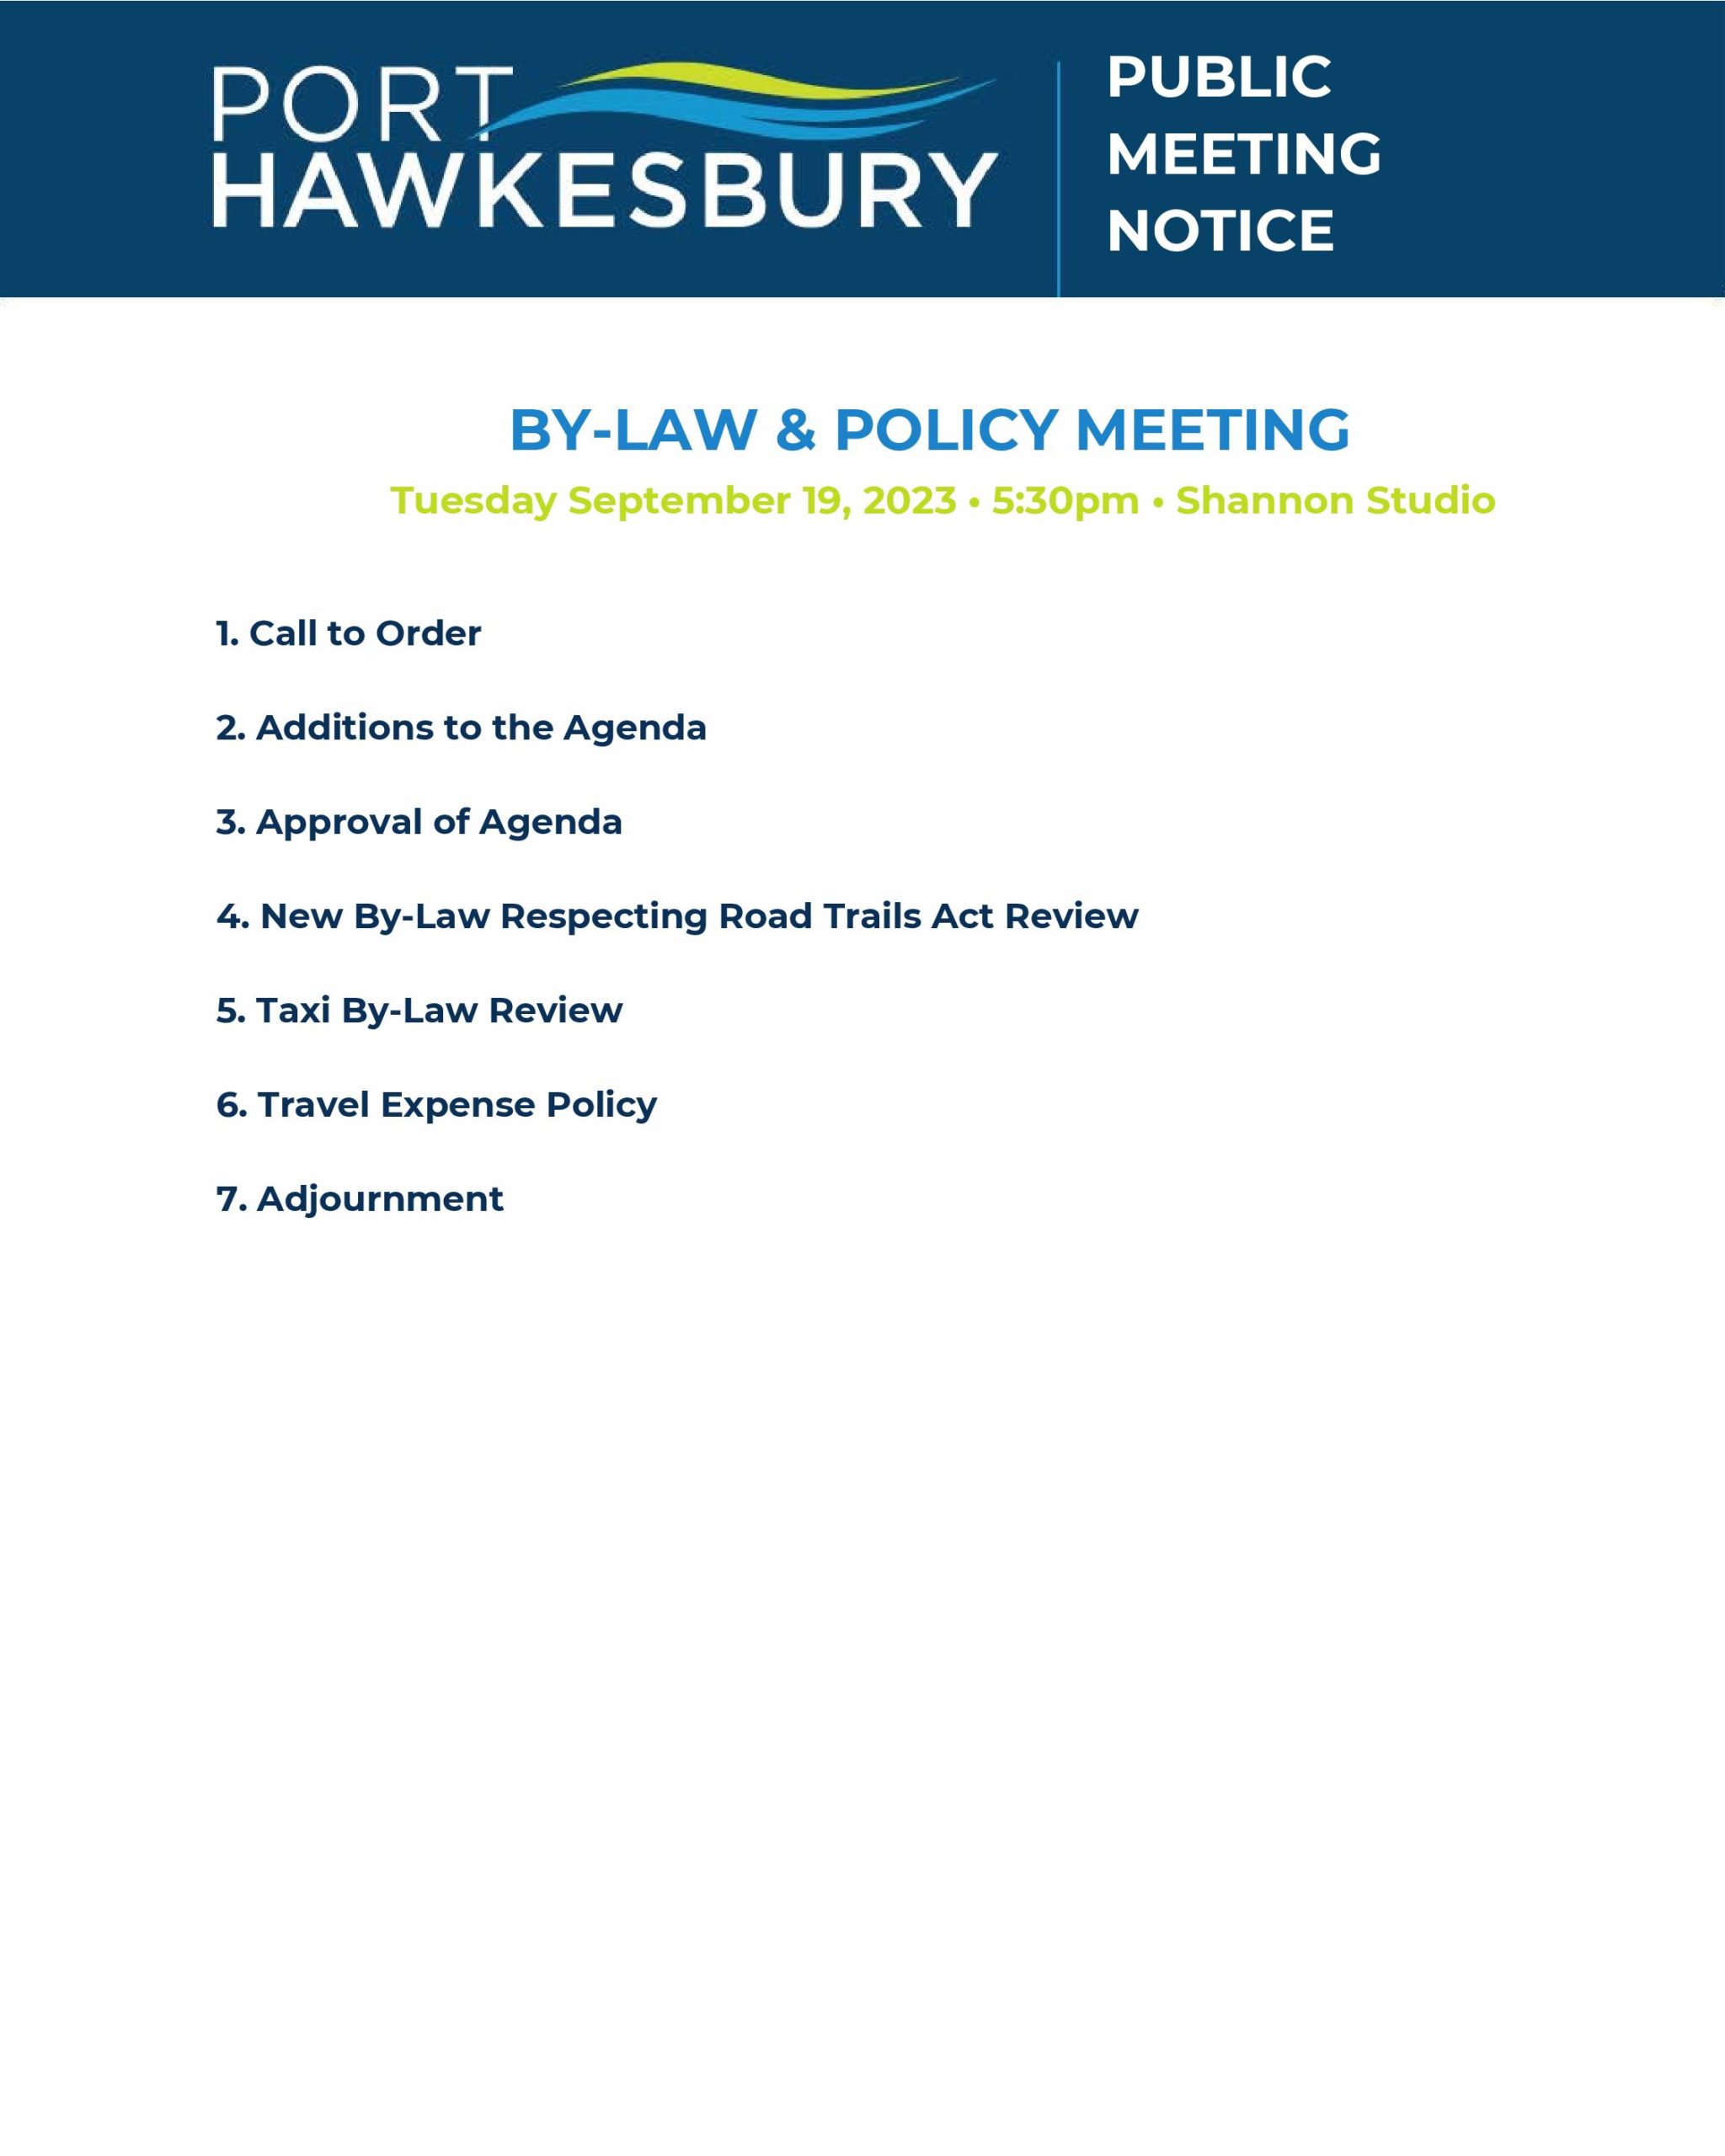 NOTICE OF BYLAW & POLICY MEETING – SEPTEMBER 19 2023